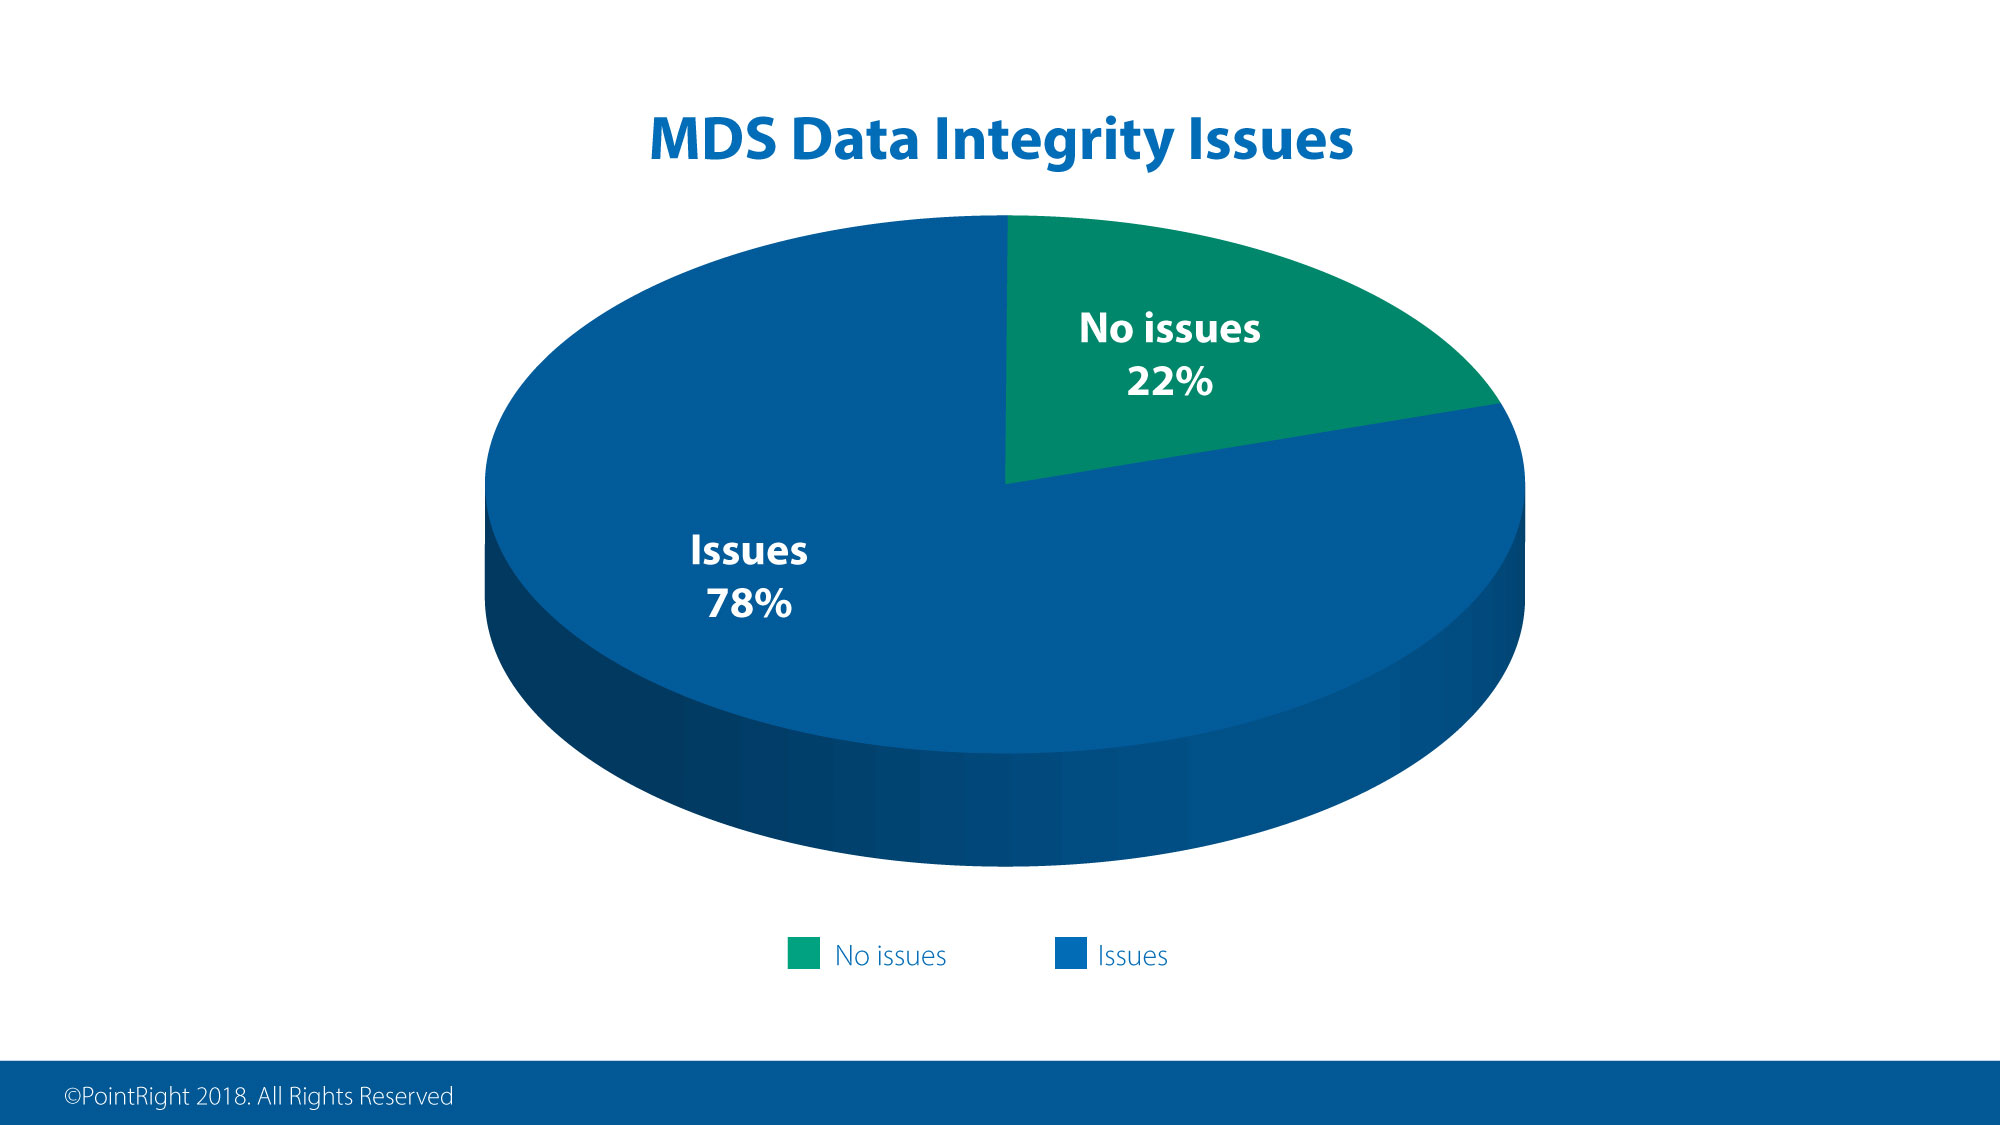 PointRight graphic, MDS Data Integrity Issues